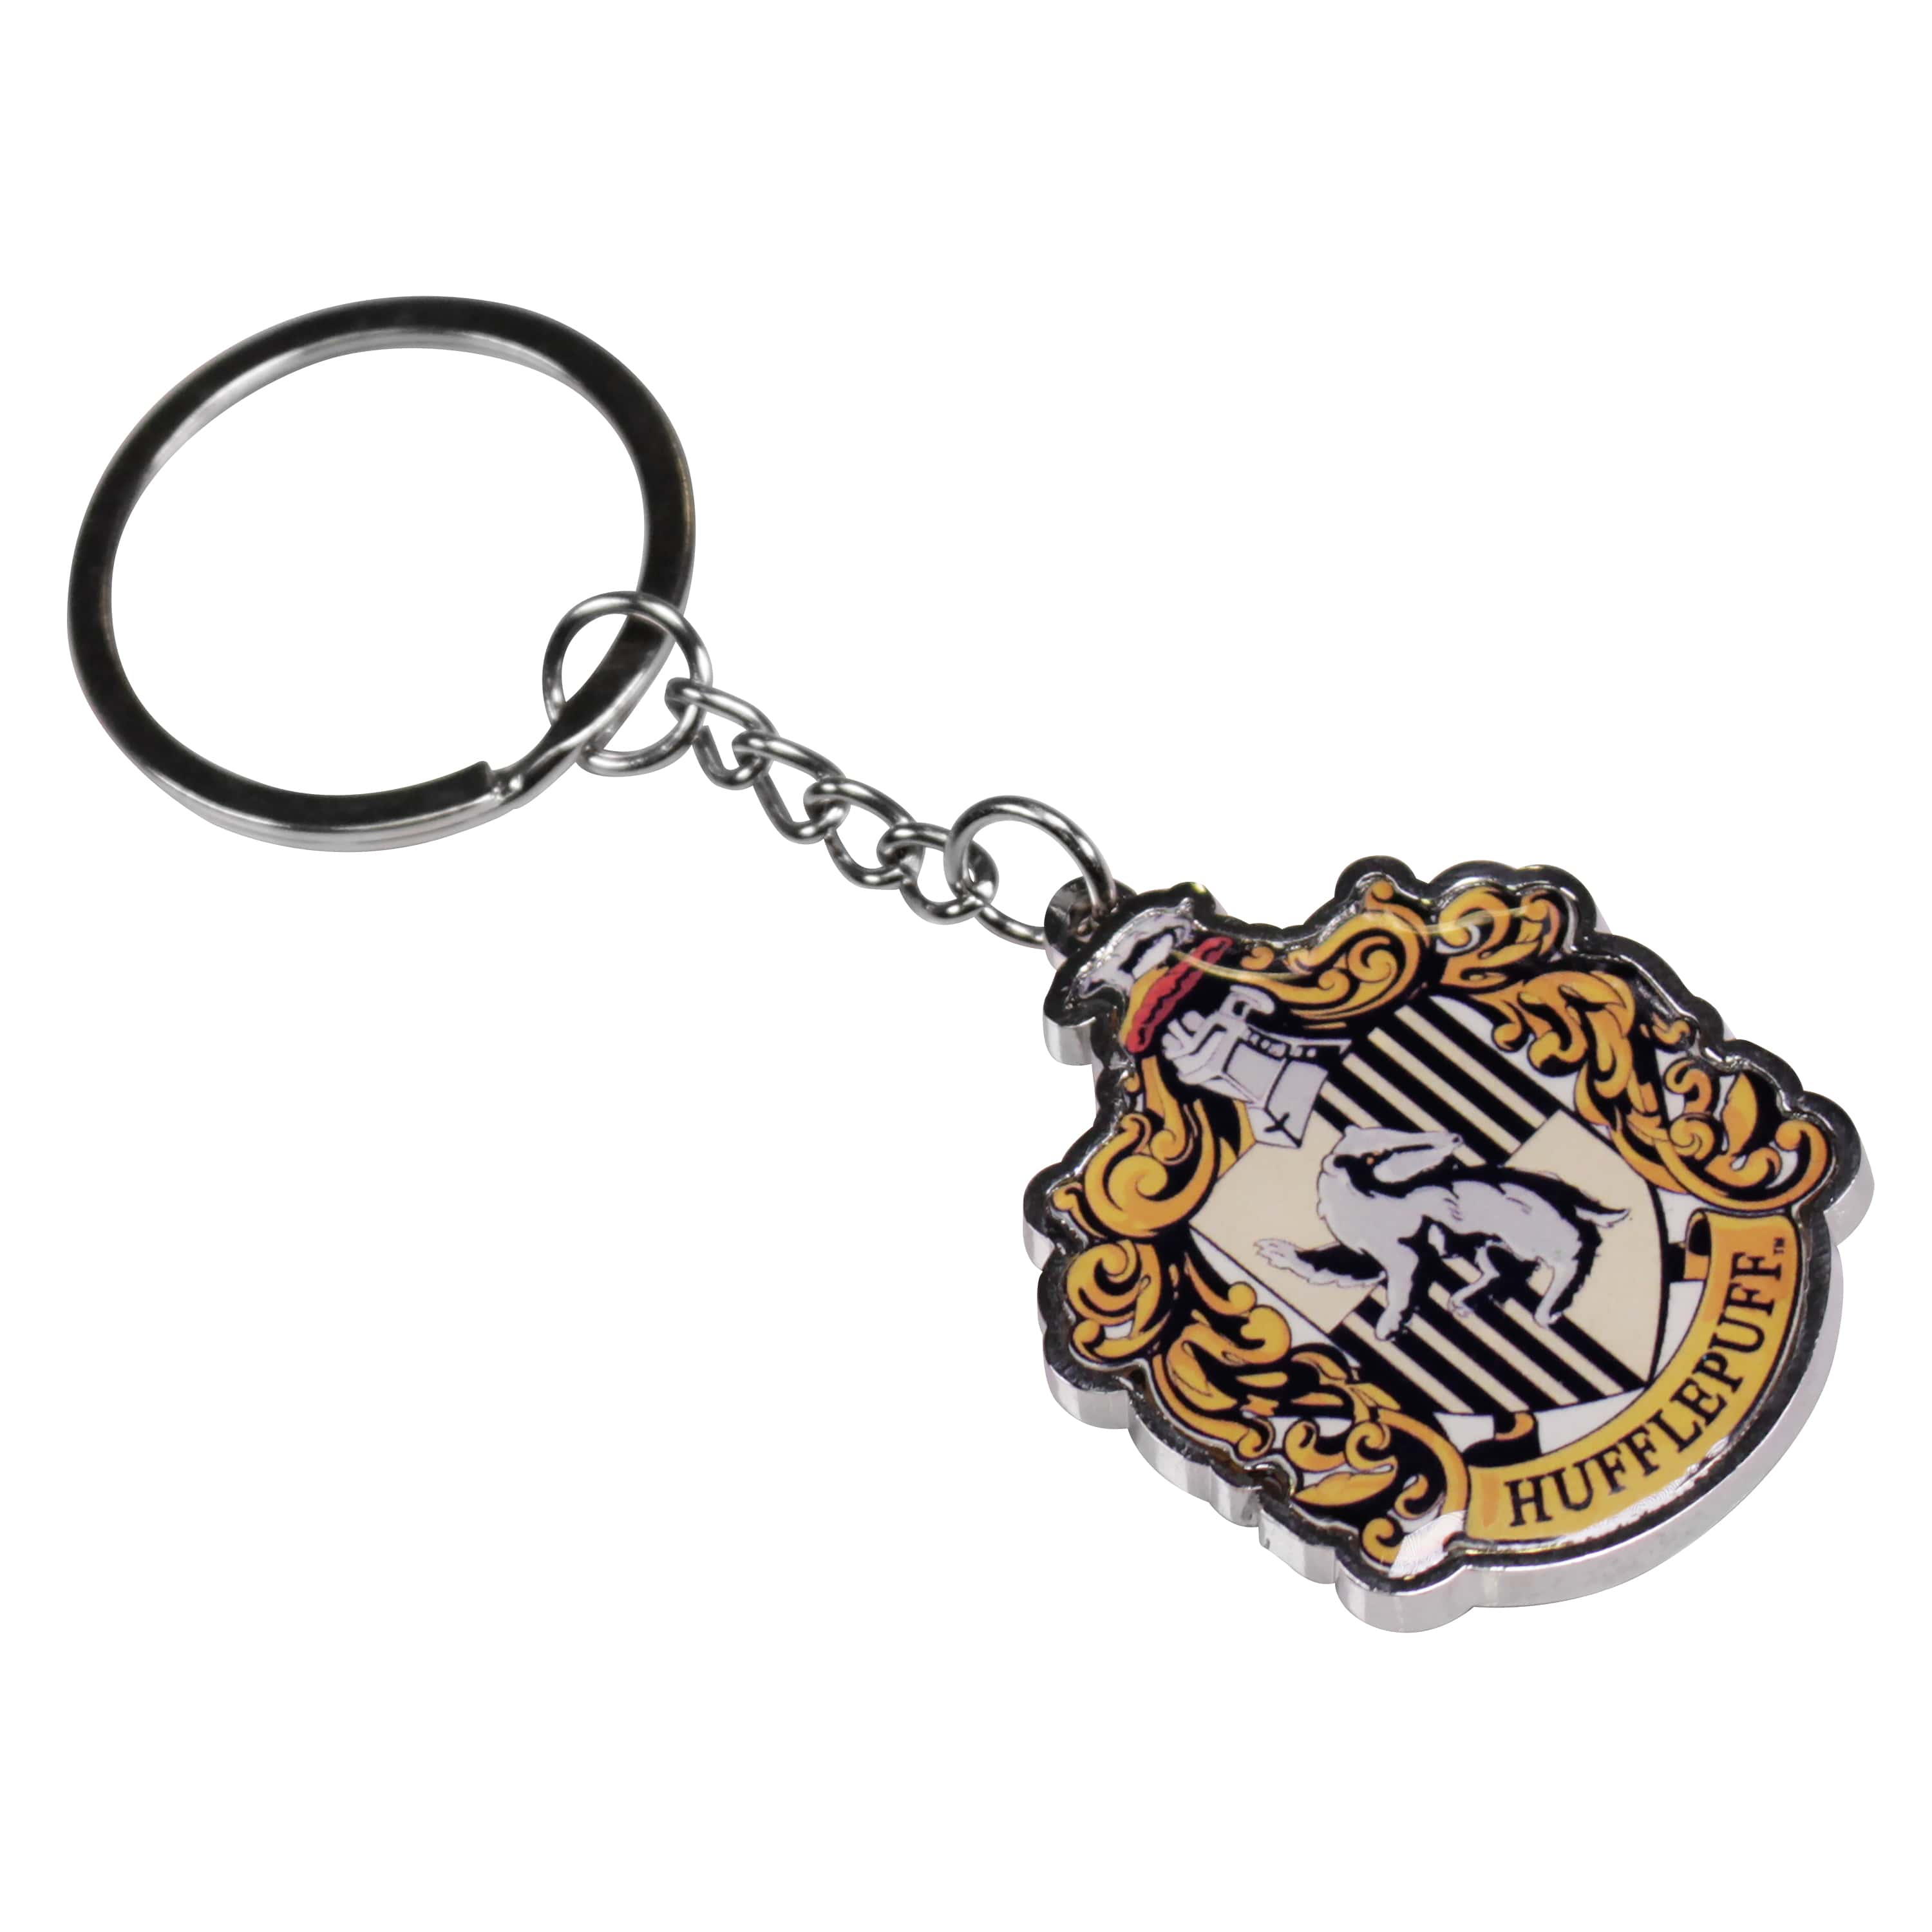 12 magical gifts for people who are obsessed with Harry Potter - Reviewed